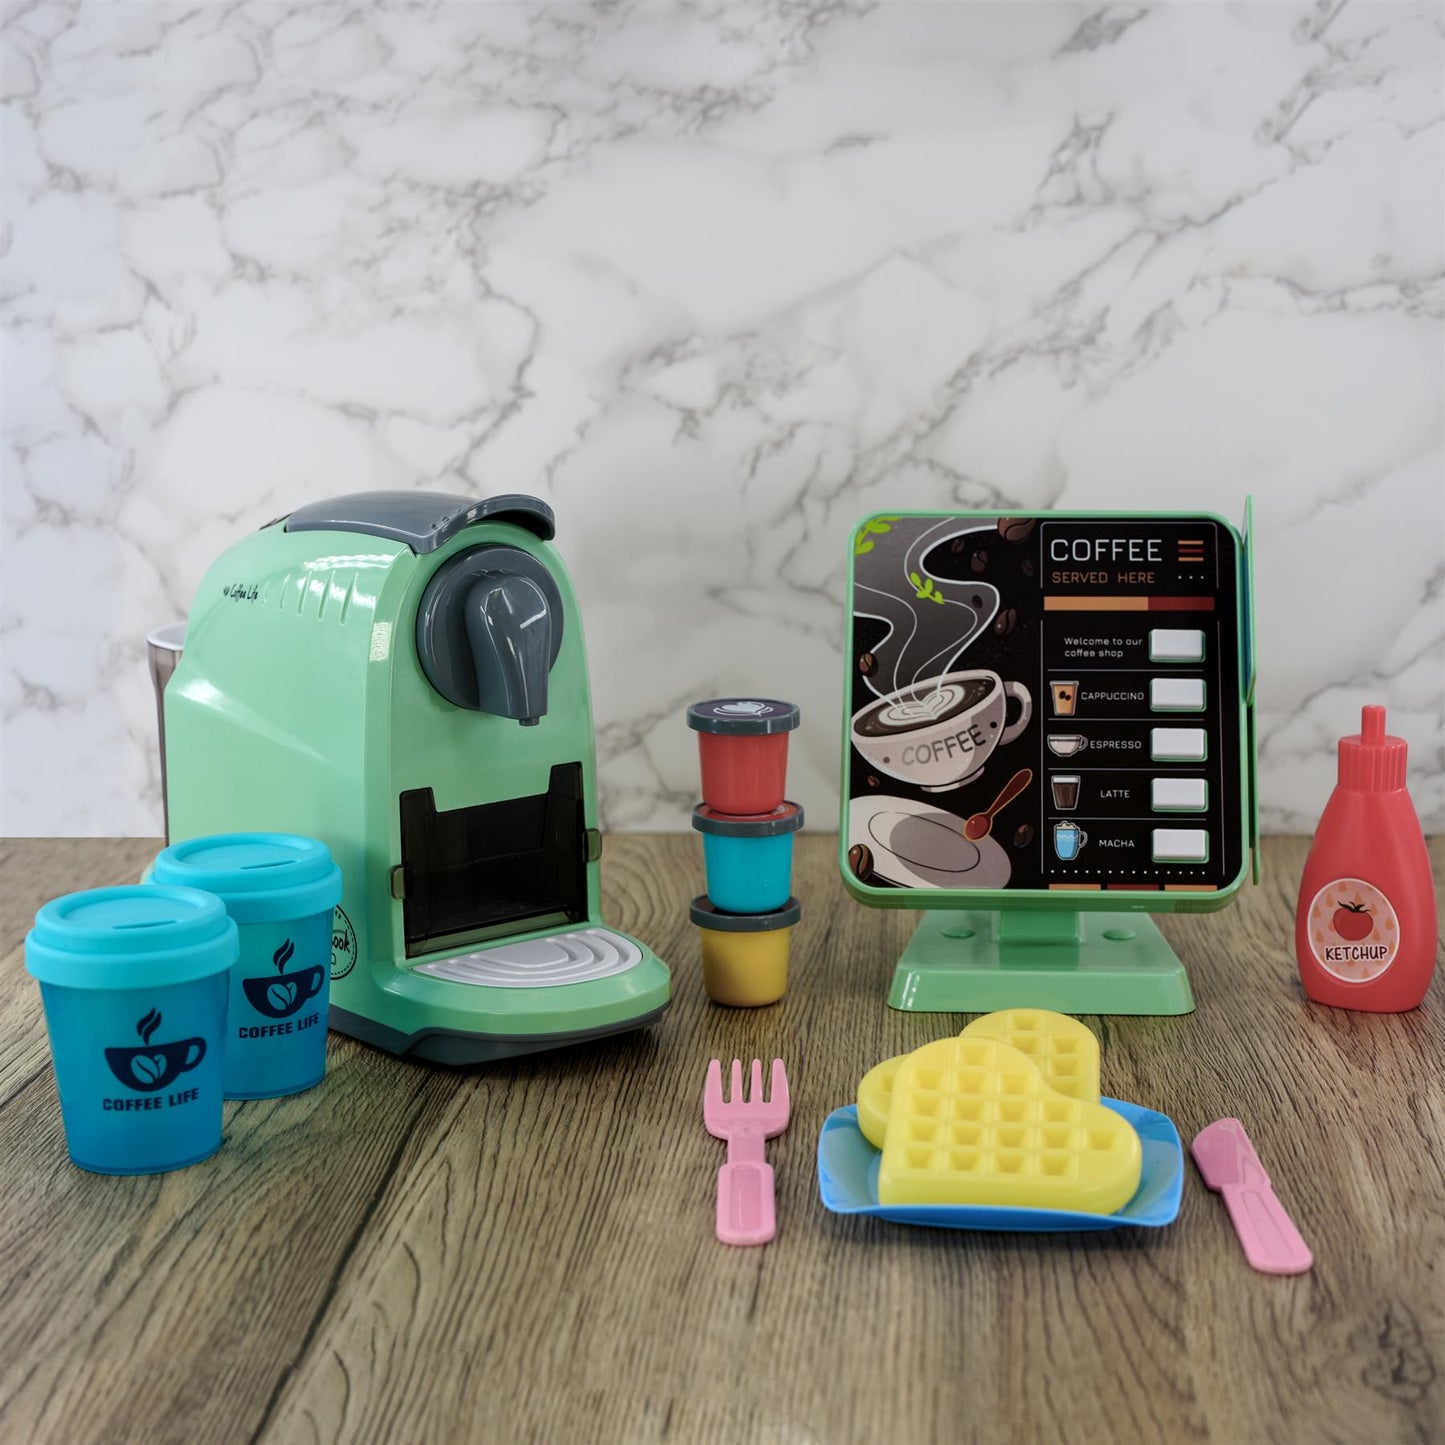 Kids Coffee Maker Machine Toy Kitchen Role Play Set with Cash Register Play Food by The Magic Toy Shop - UKBuyZone